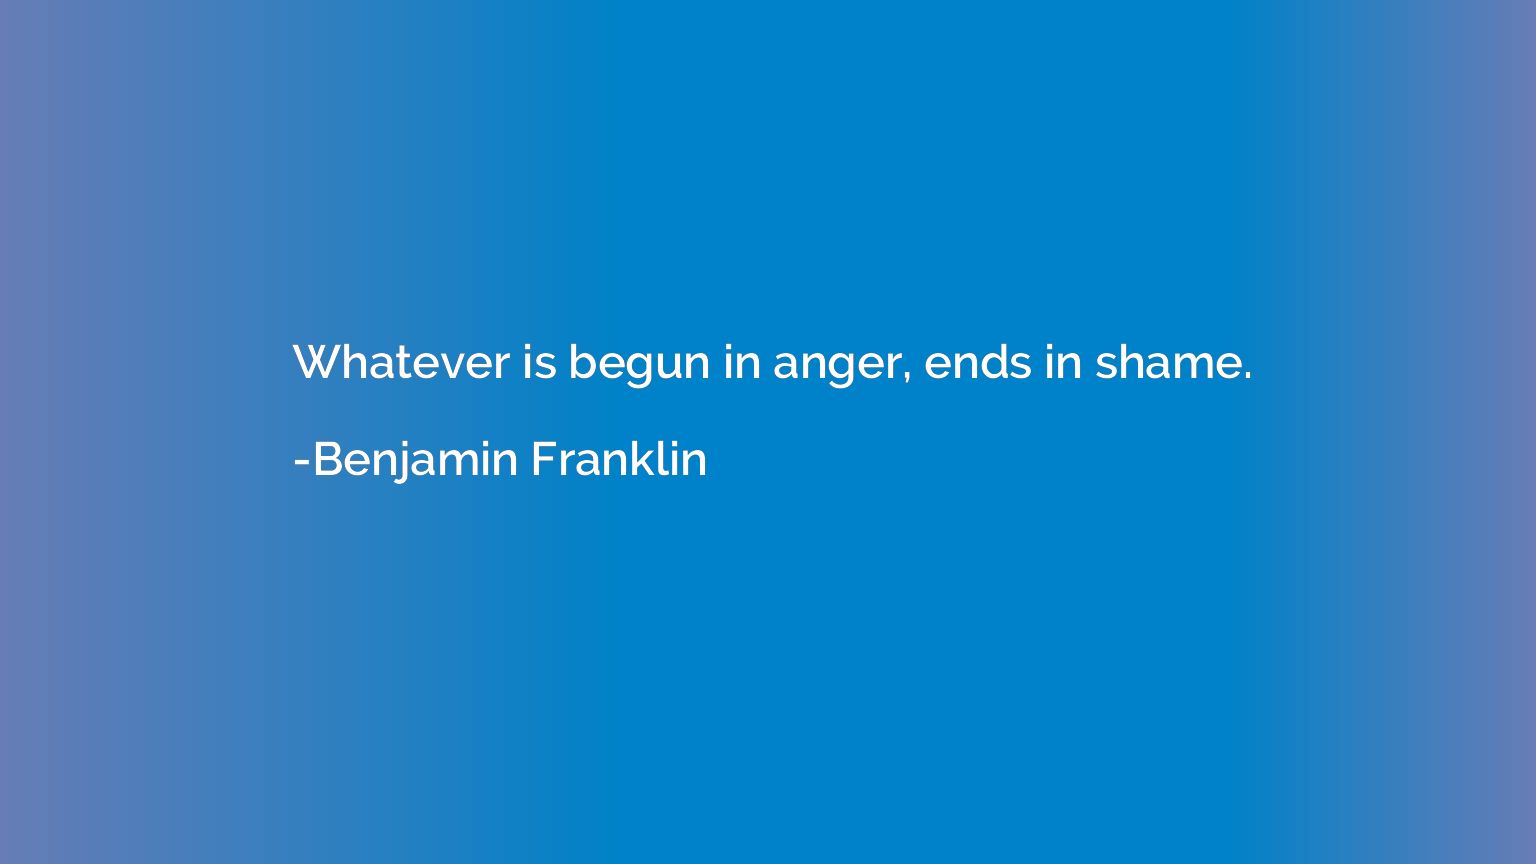 Whatever is begun in anger, ends in shame.